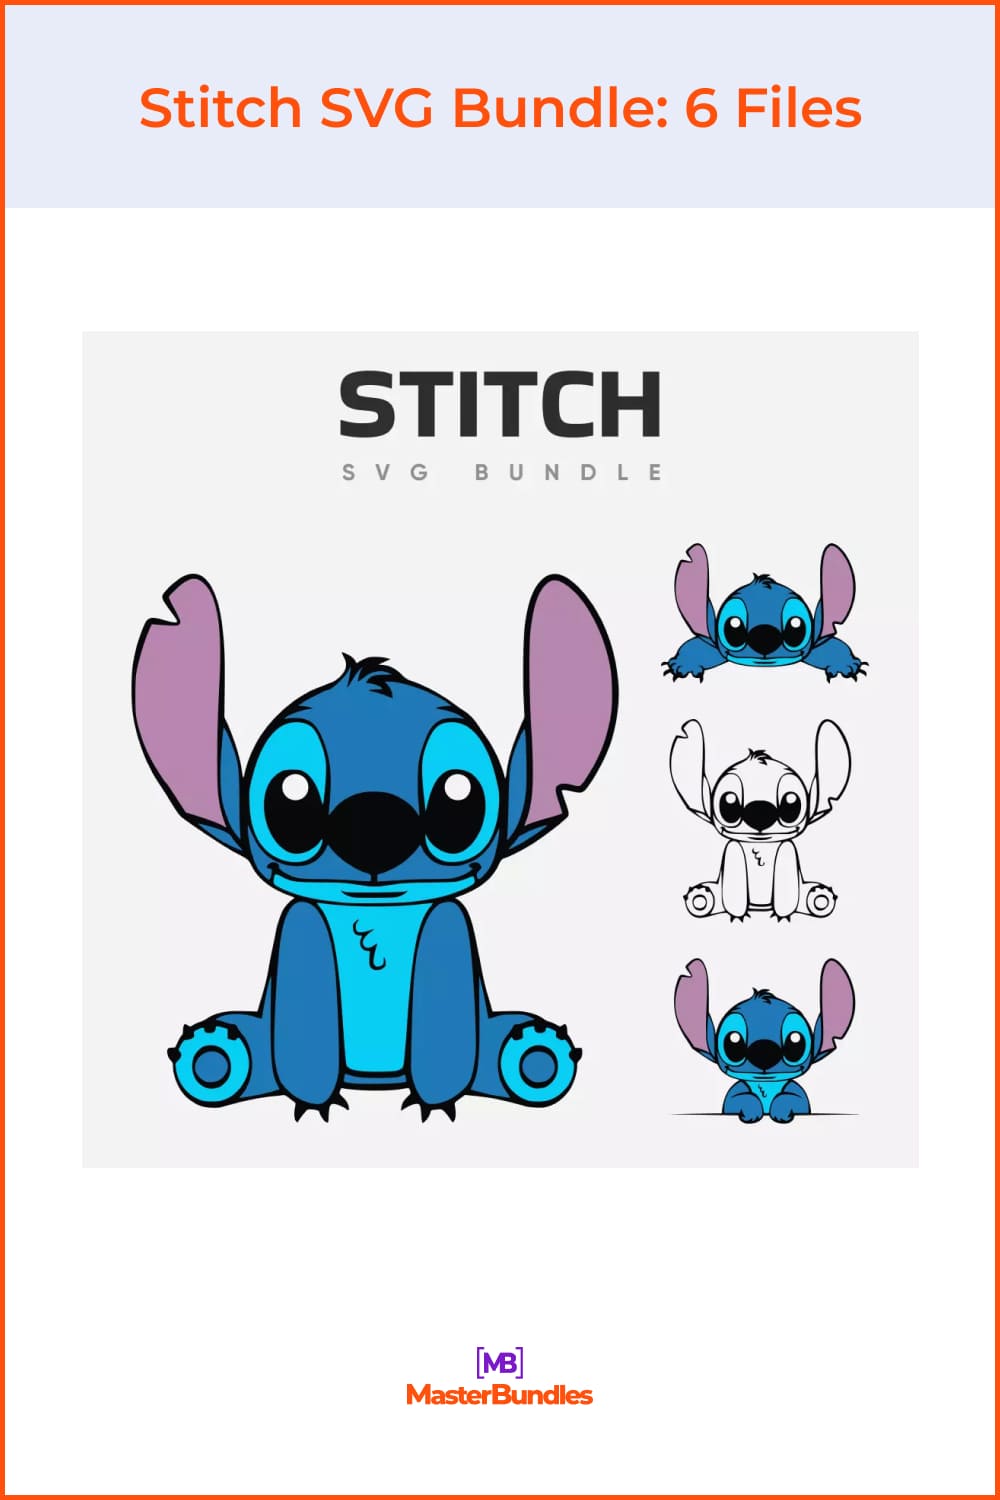 Stitch is sitting and listening.